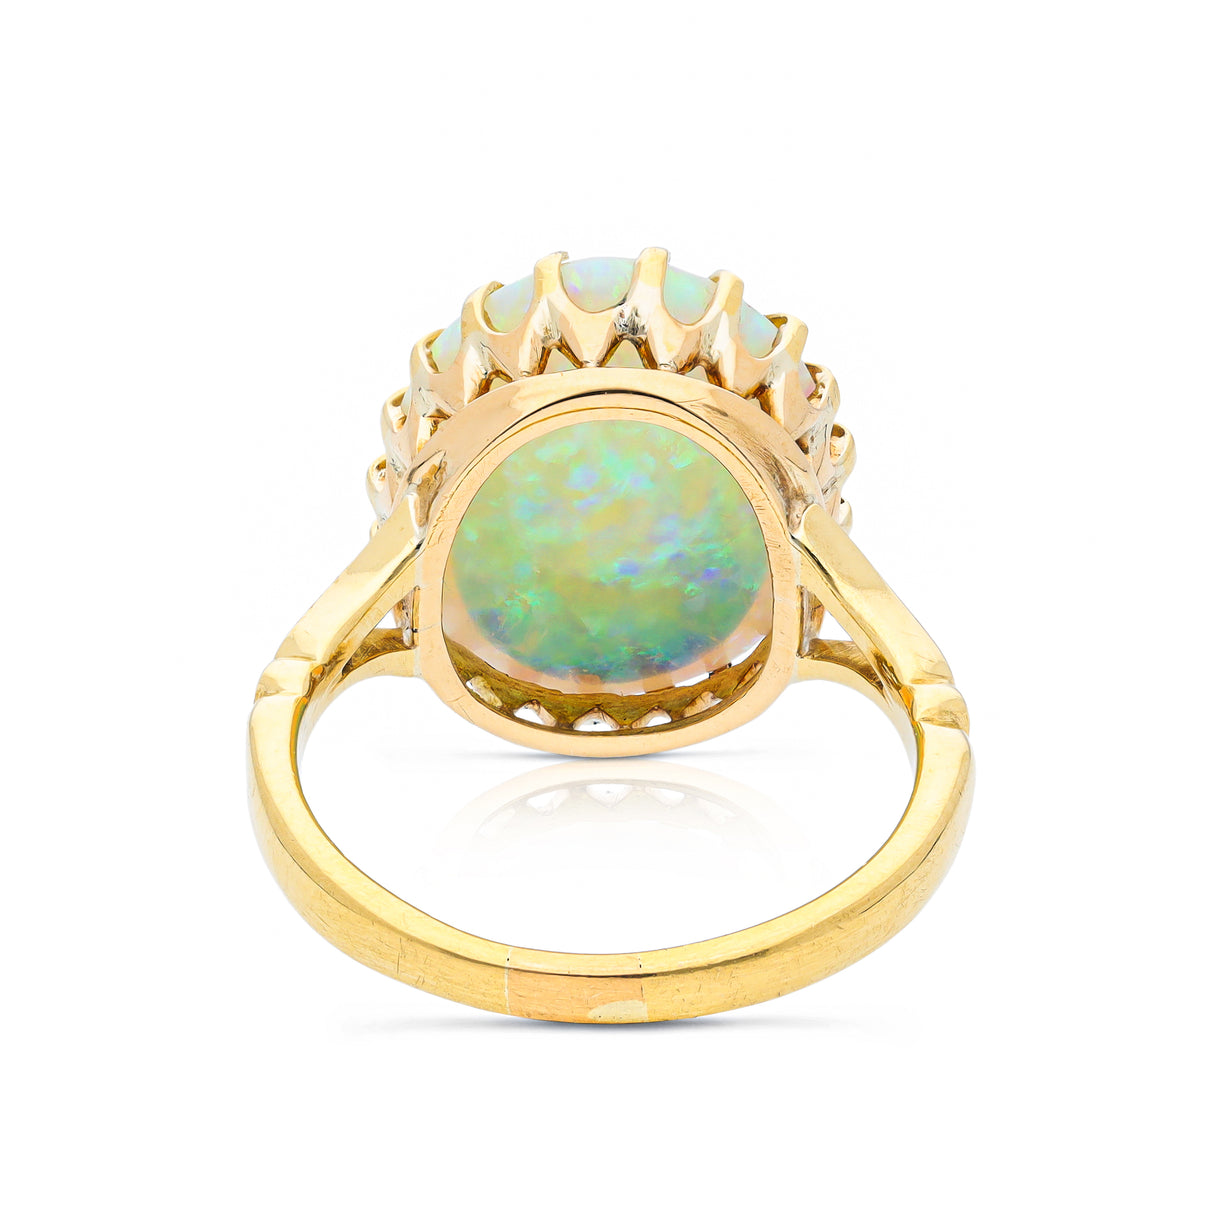 cabochon white opal cocktail ring with 18ct yellow gold band, back view. 